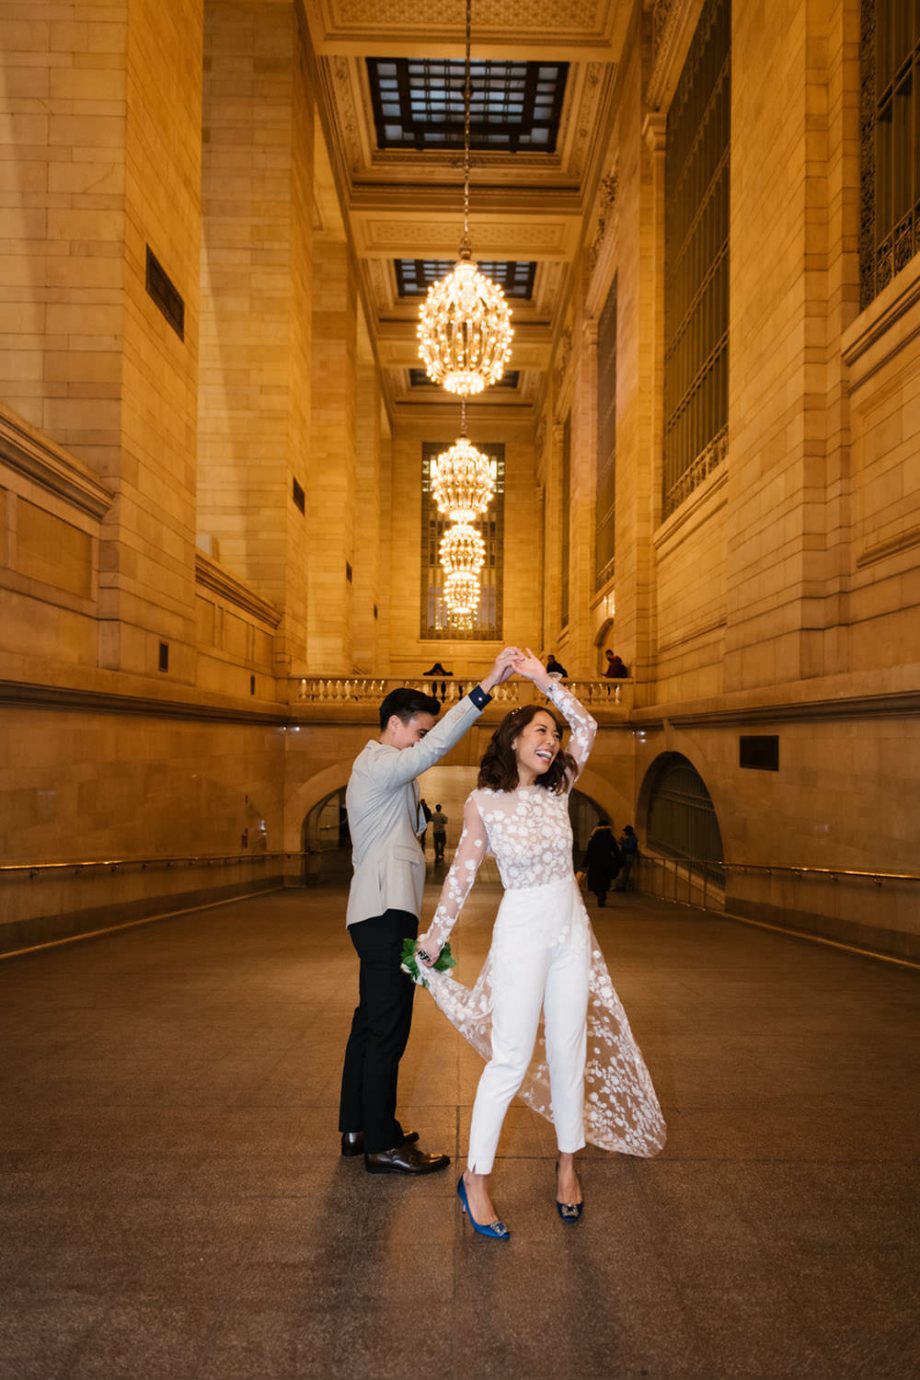 Grand Central wedding in NYC